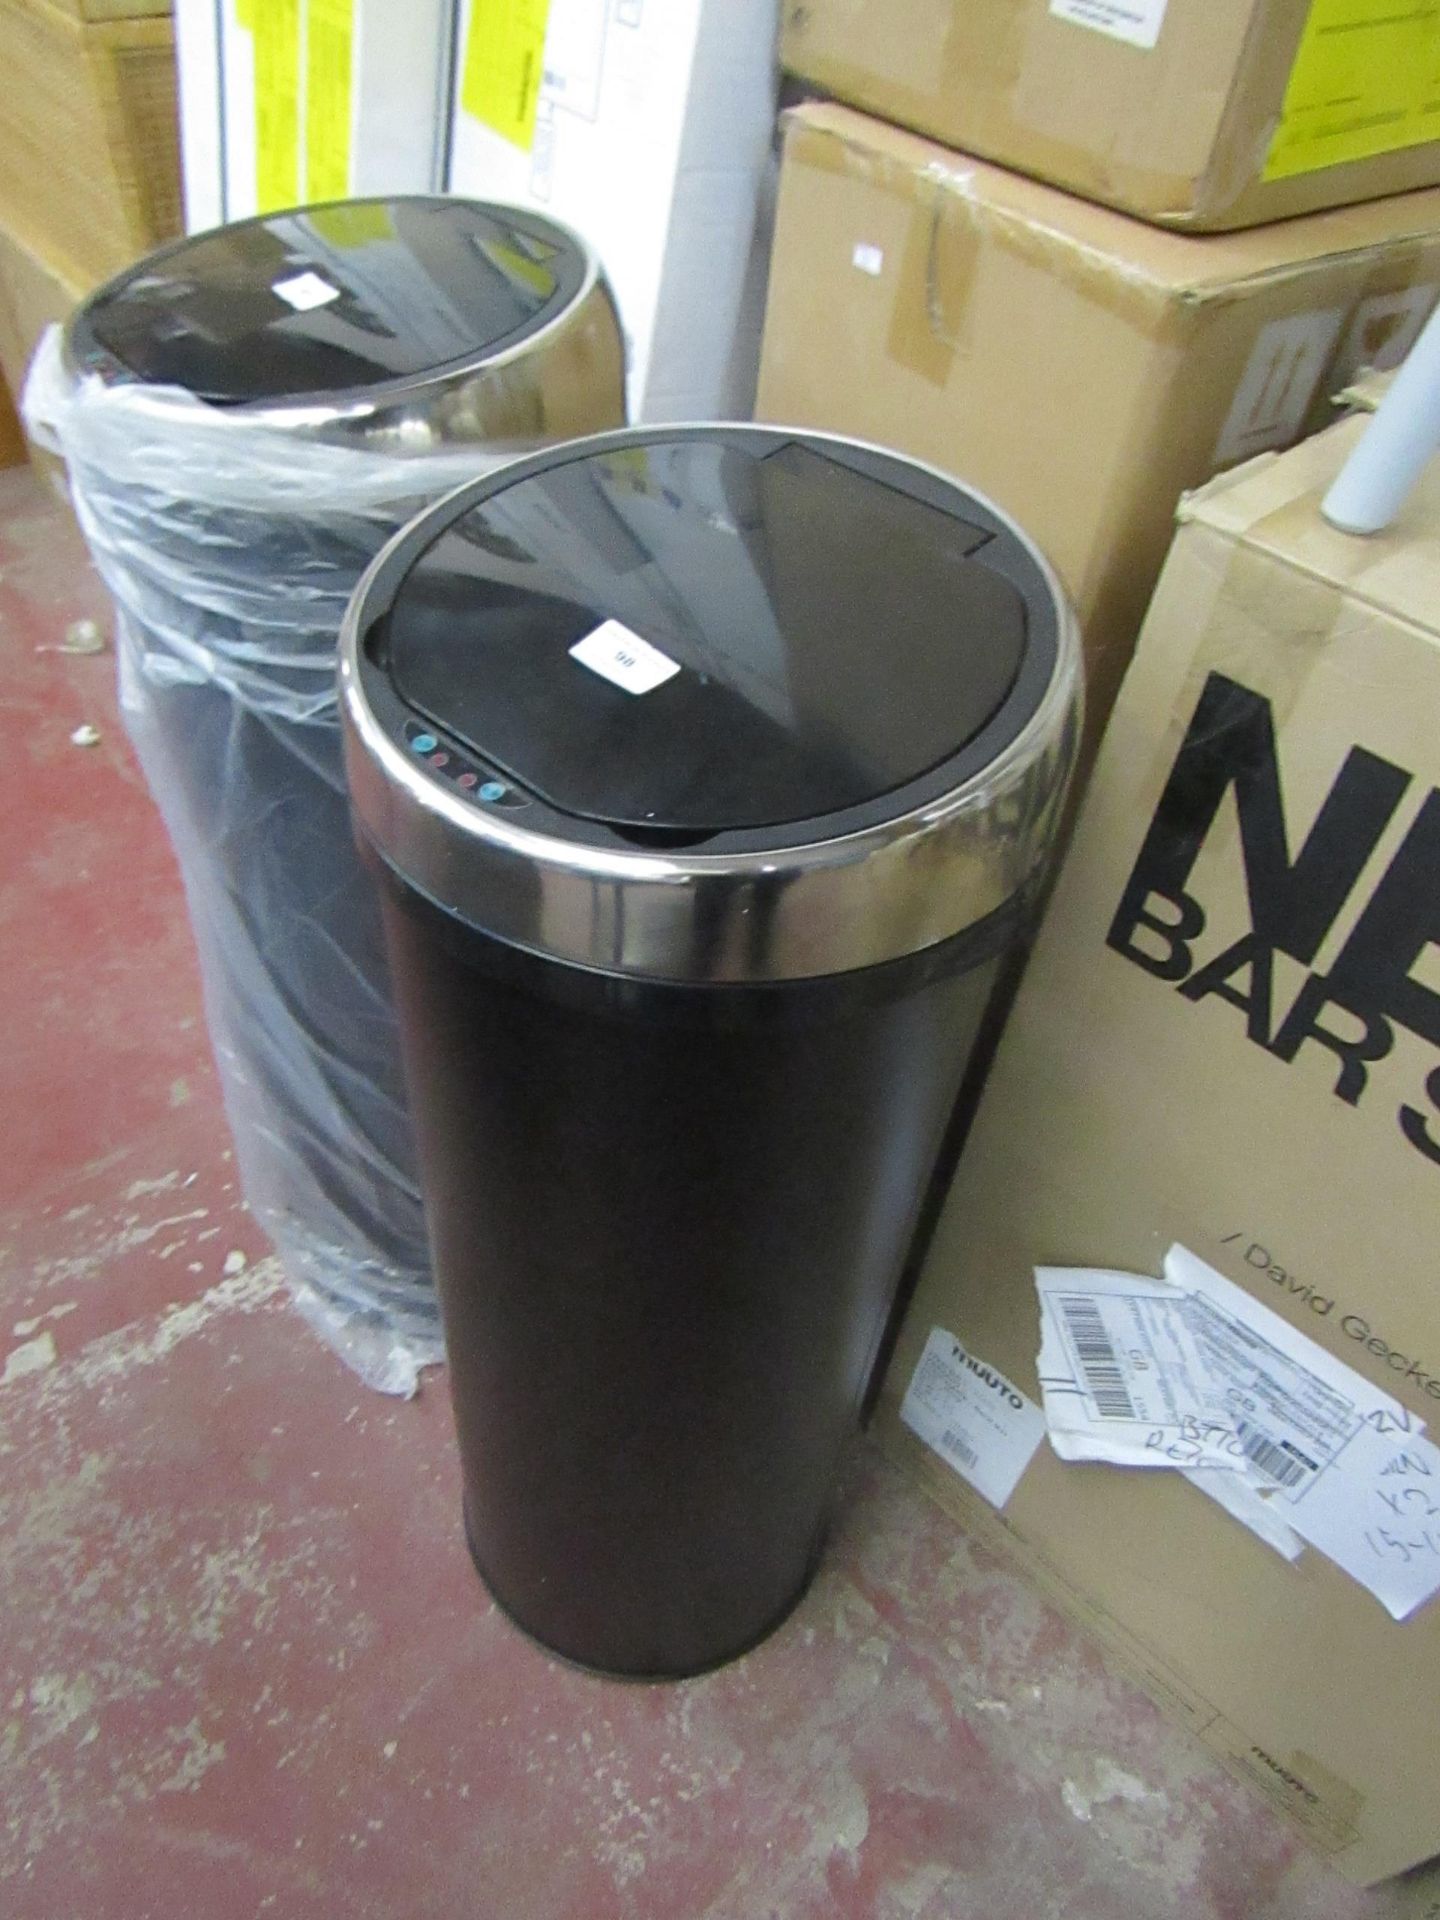 | 1X | MADE.COM SENSE TOUCH FREE 50L BIN IN BLACK | UNCHECKED AND BOXED | RRP £49 |